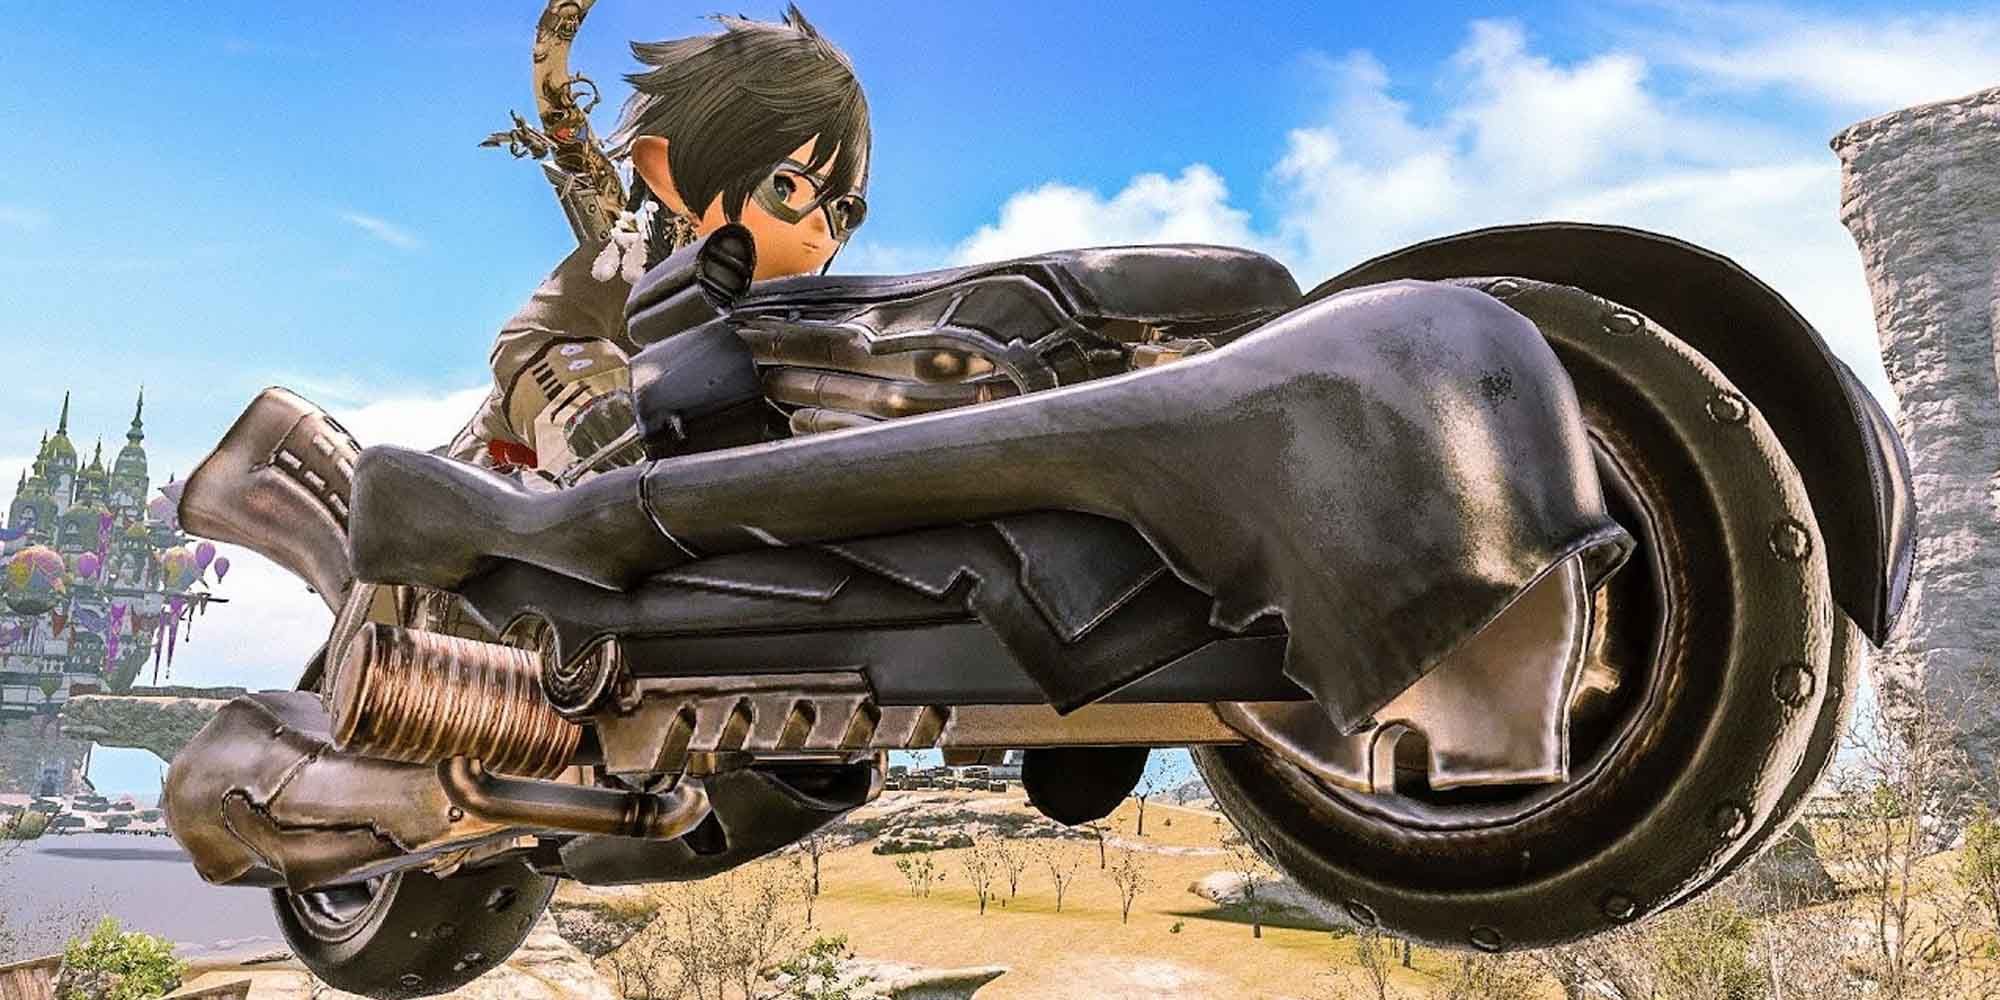 SDS Fenrir is a motorcycle mount in Final Fantasy 14